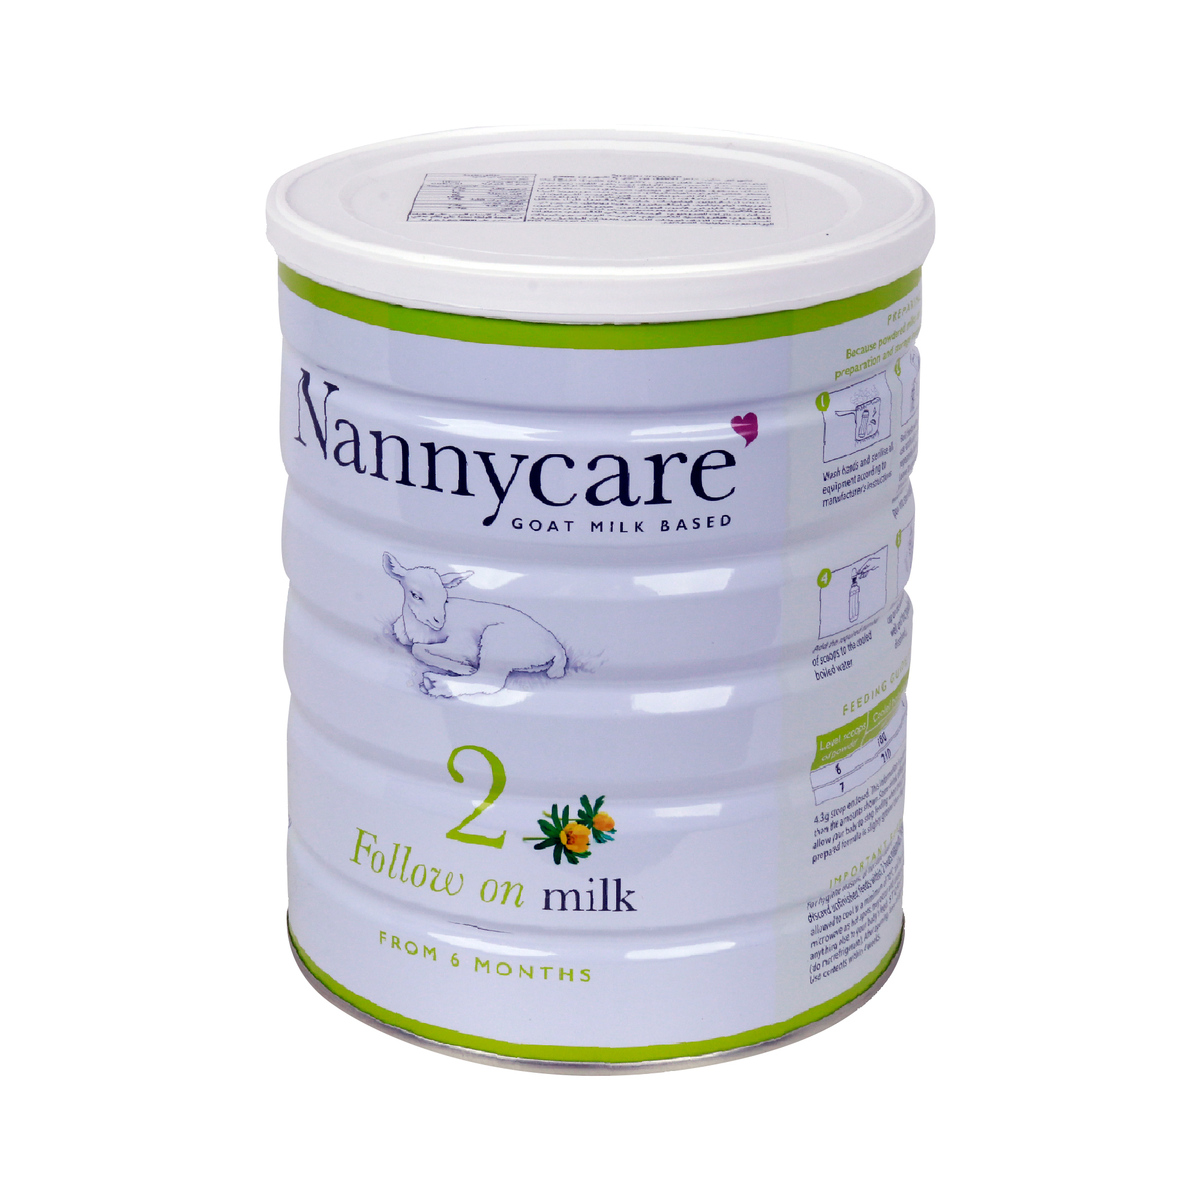 Nanny Care Goat Milk Based Stage Follow On Formula From 6 Months 900 g